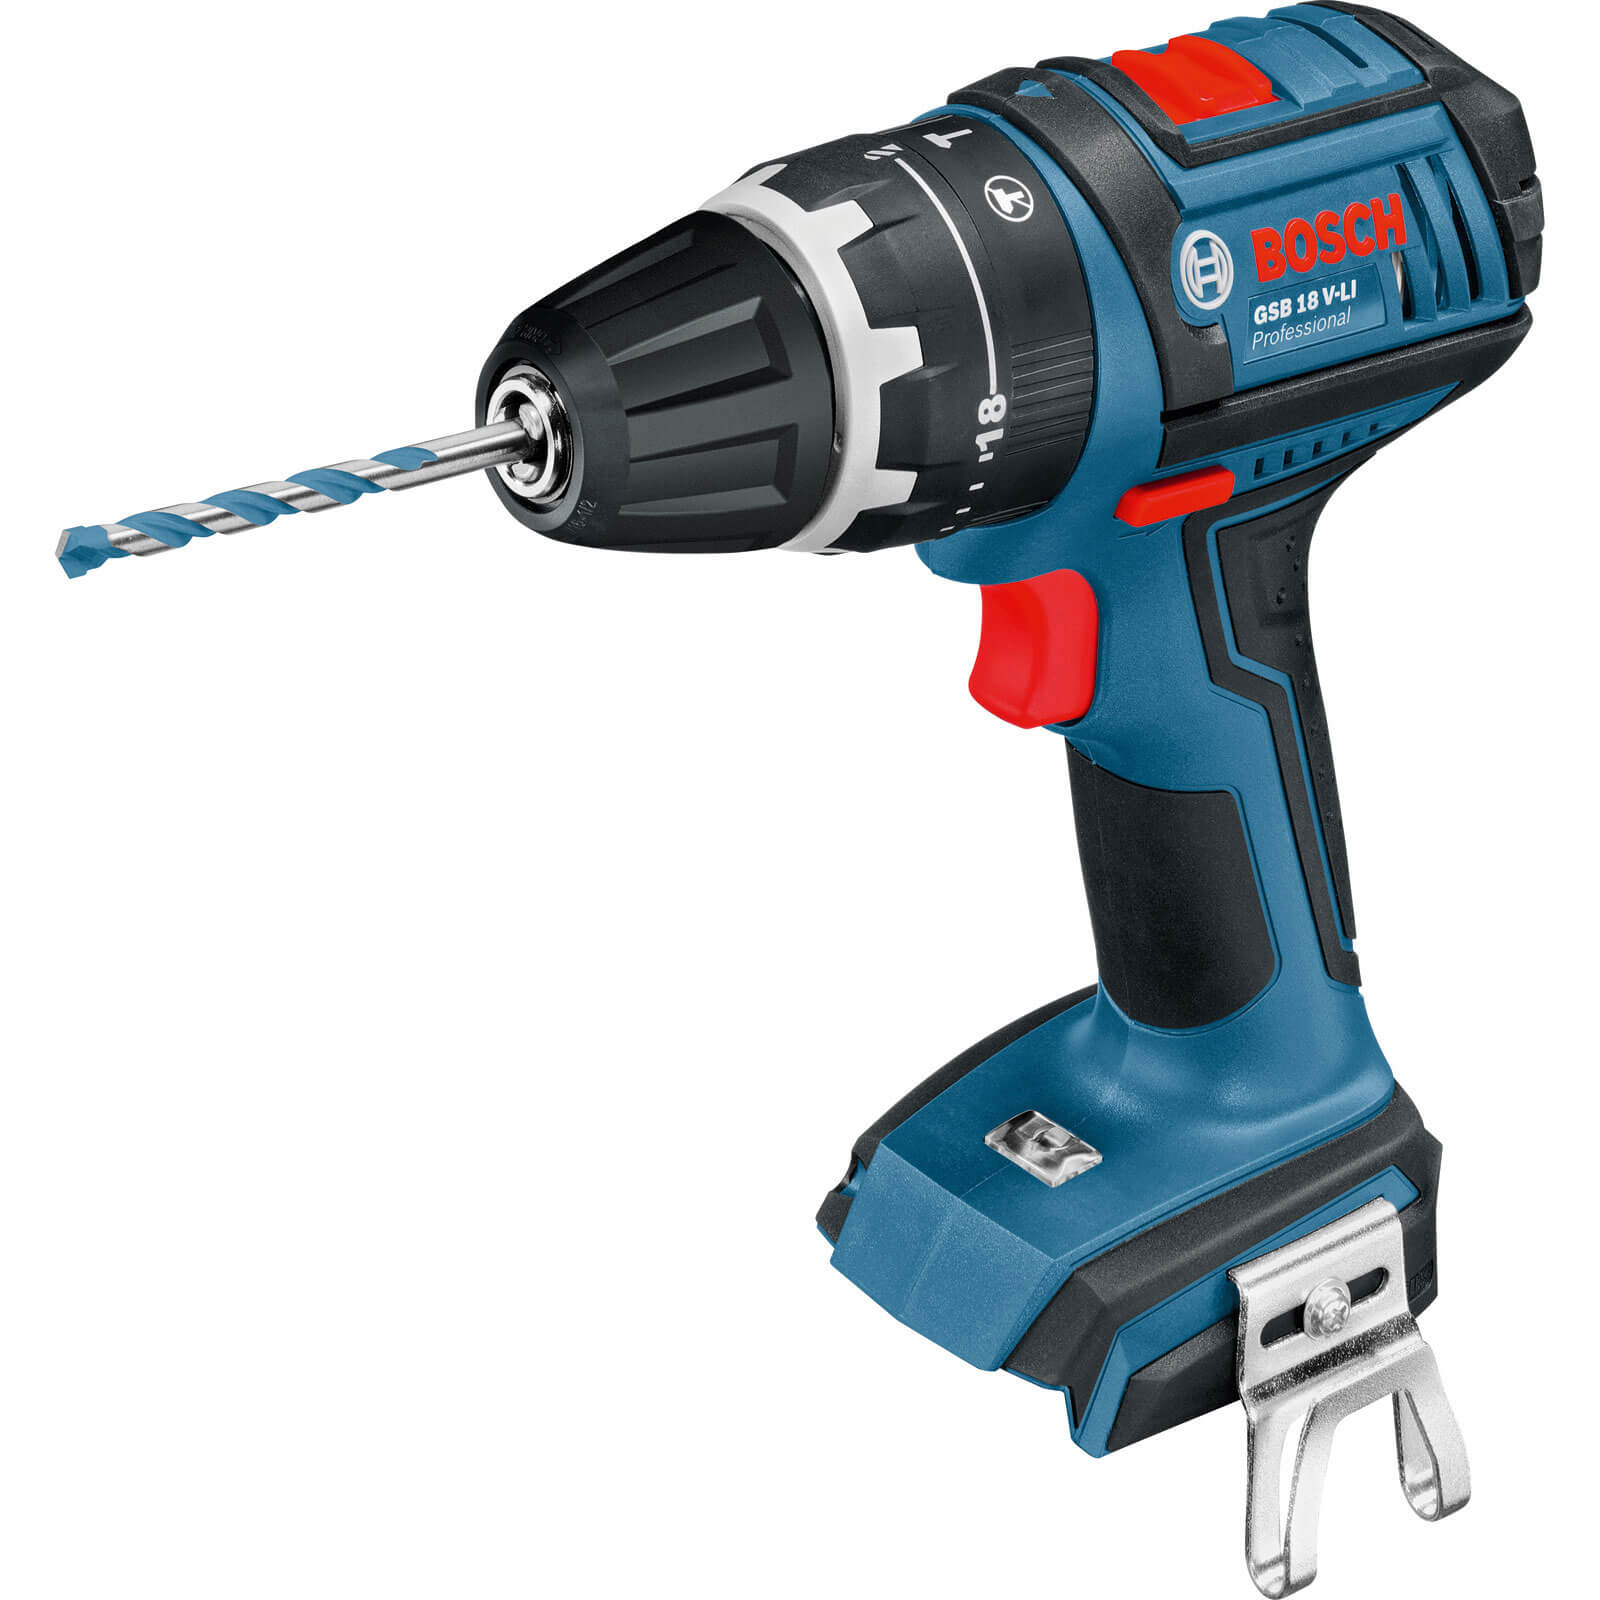 Bosch GSB 18V-LI 18v Cordless Dynamicseries Combi Drill without Battery or Charger